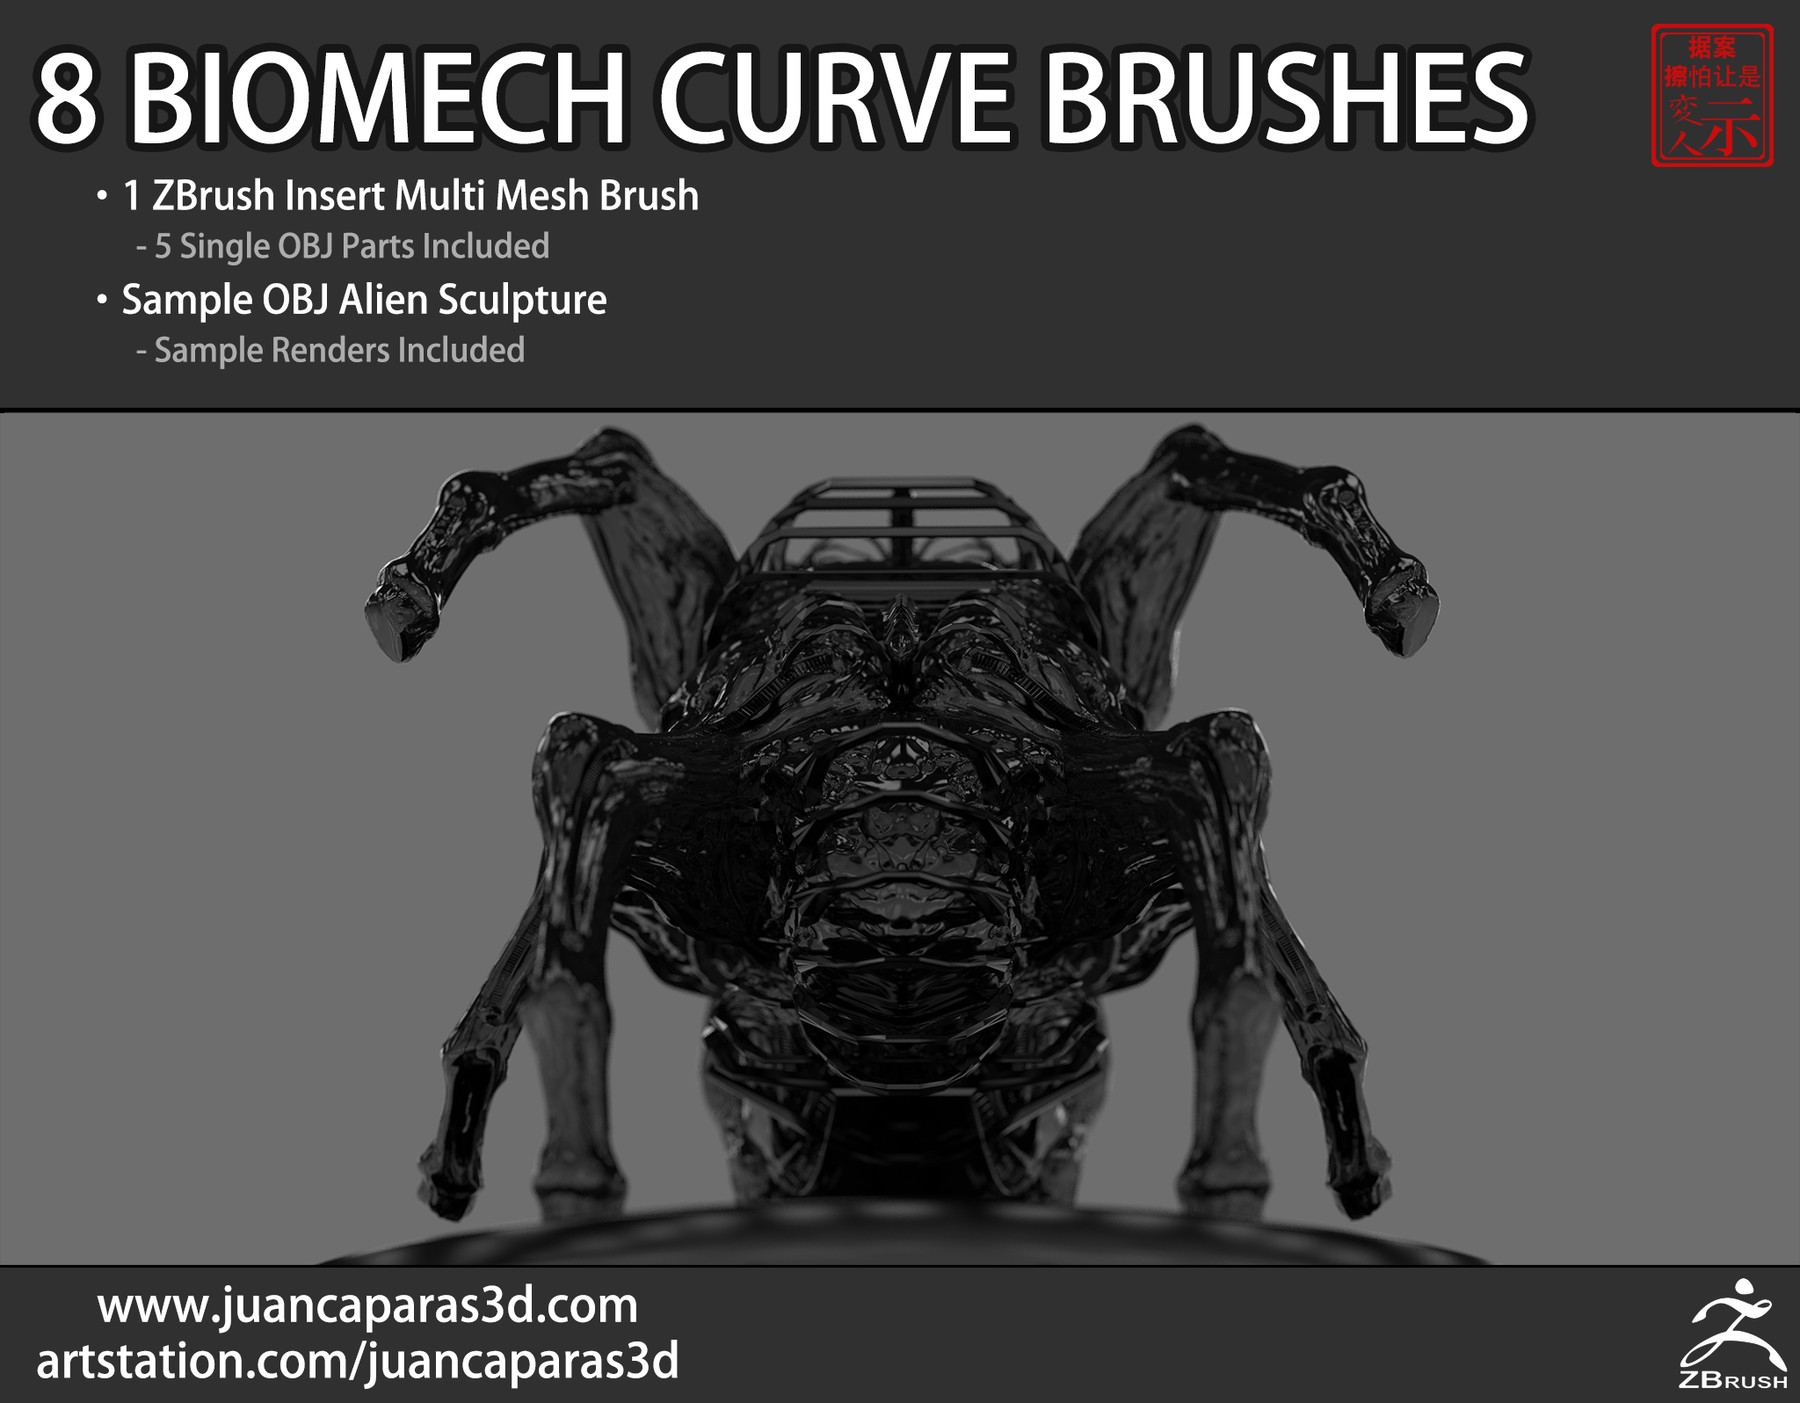 zbrush 8 features